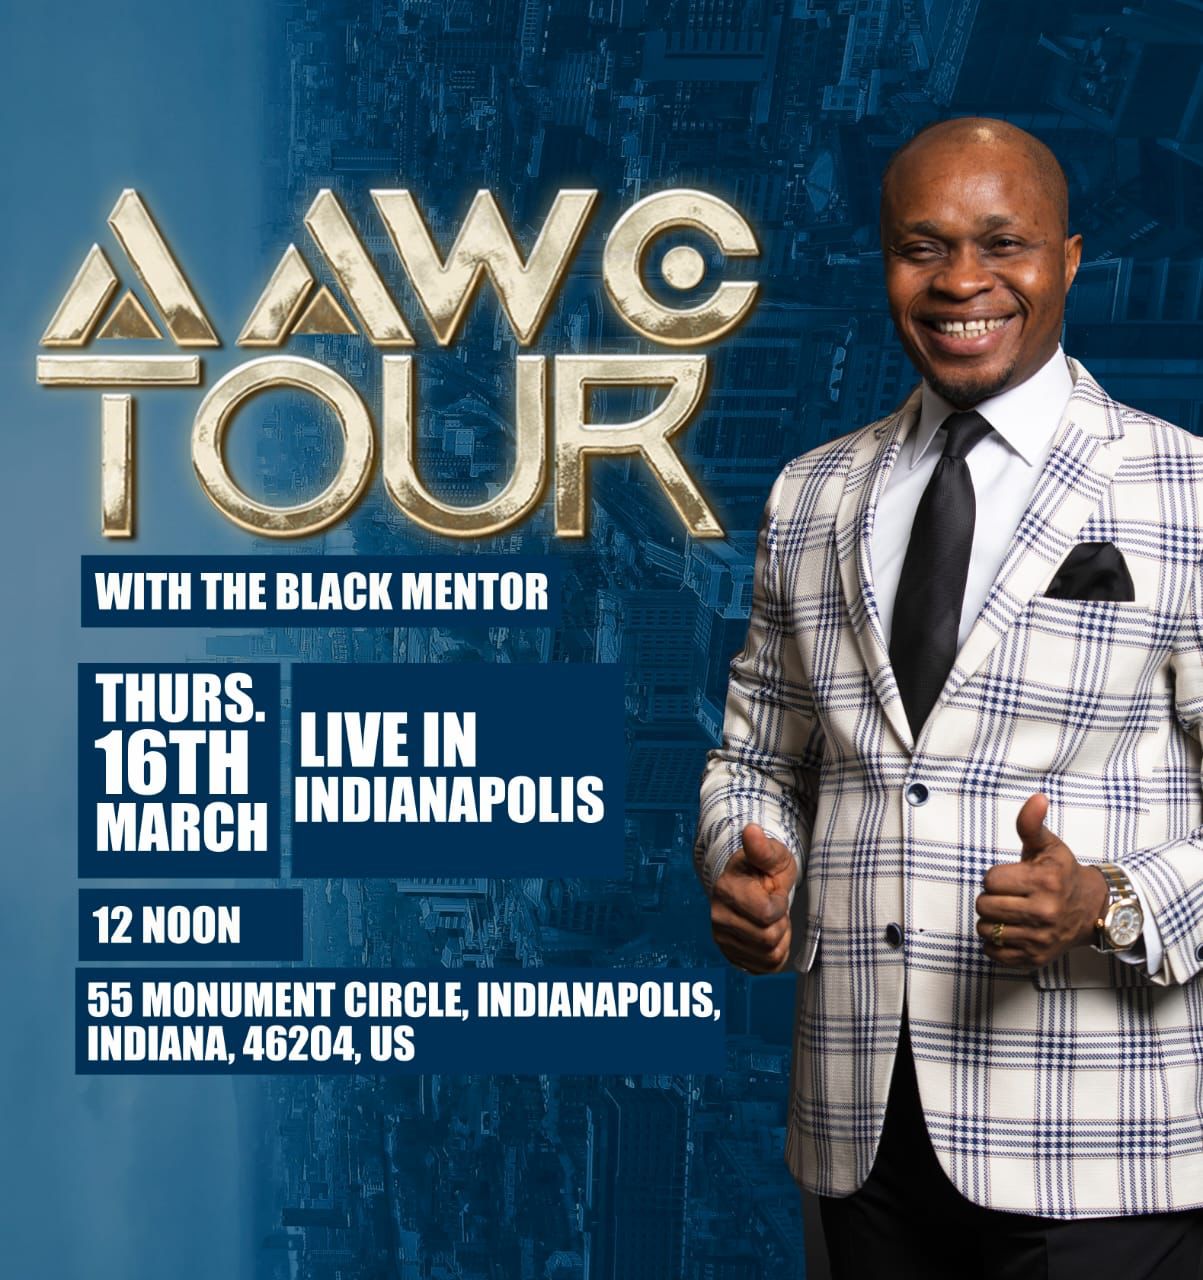 AAWC Black Mentor National Tour - Indianapolis